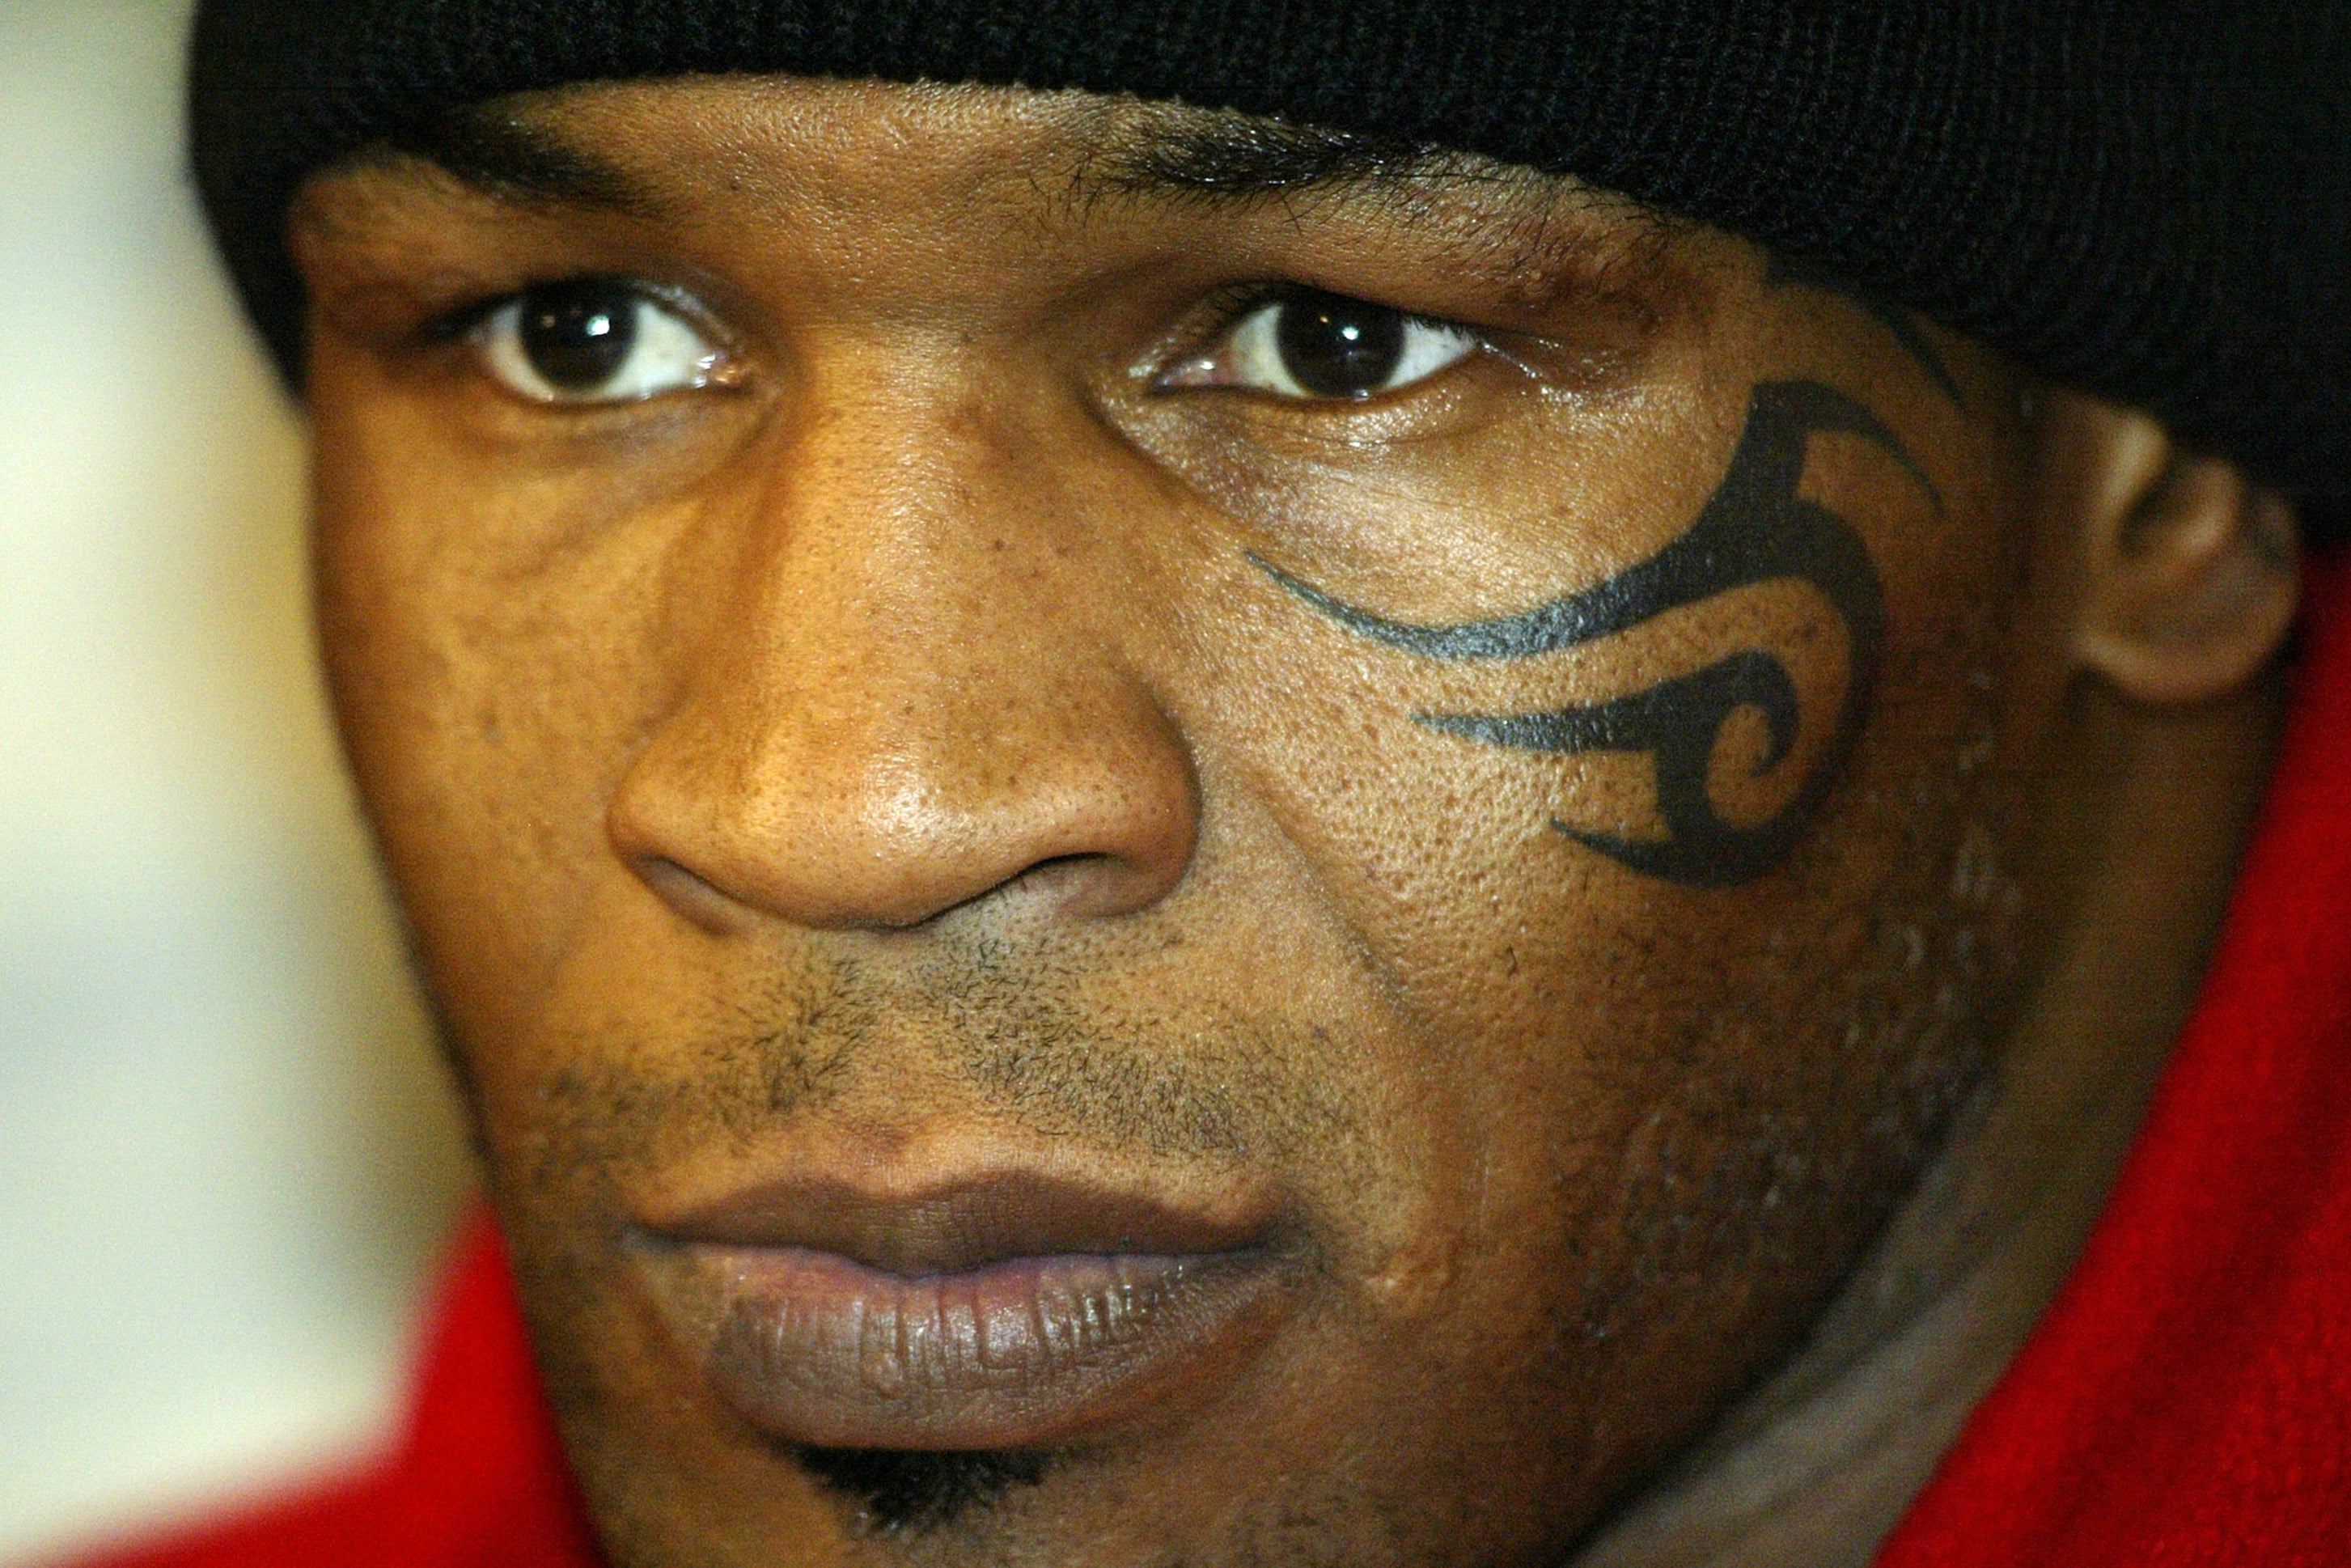 Mike Tyson after his fight with Clifford Etienne in 2003